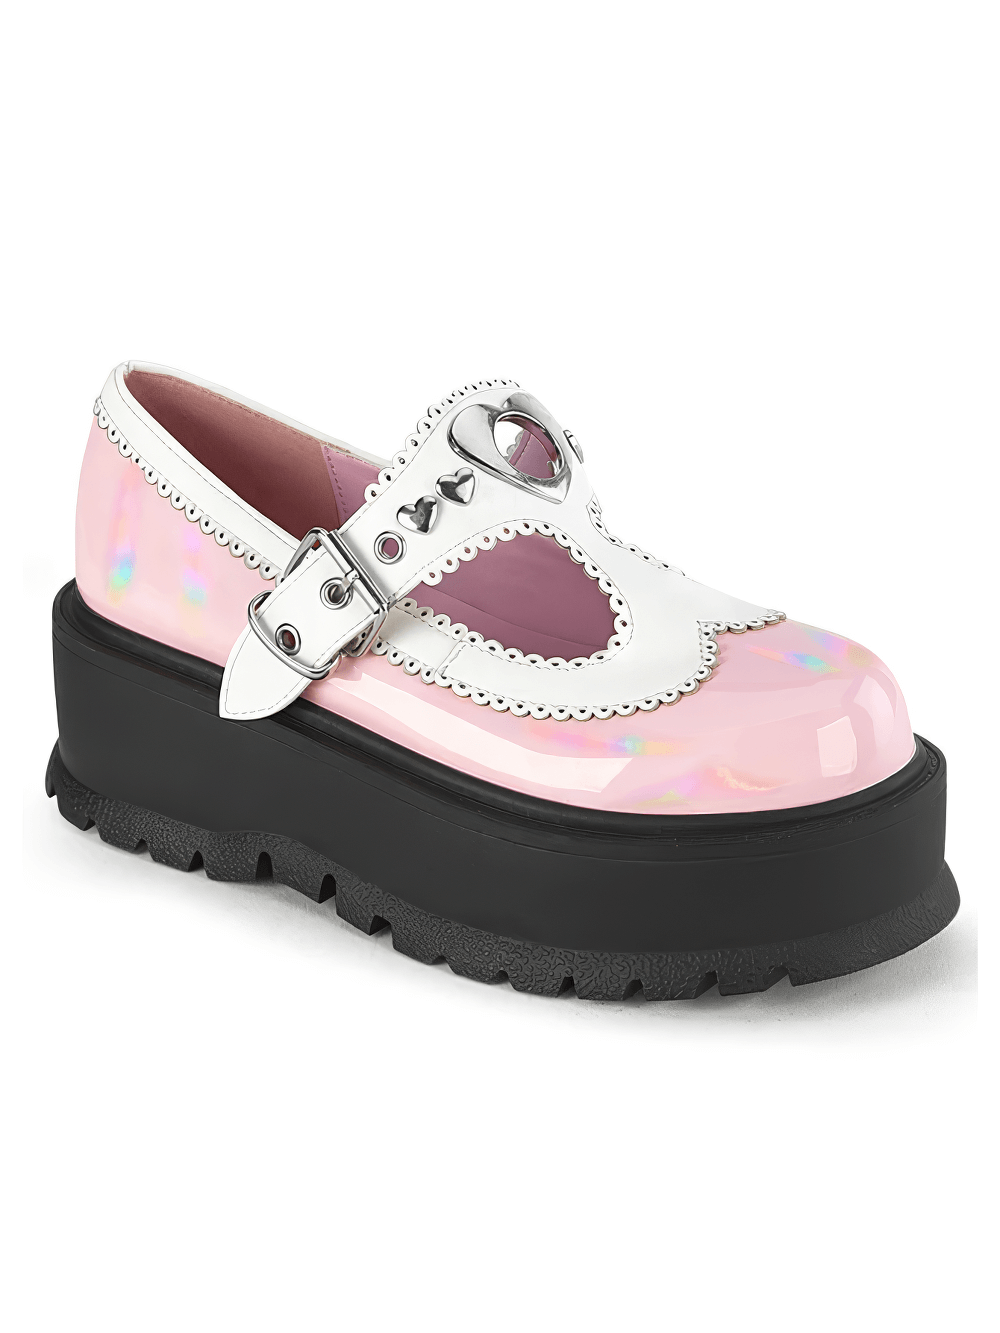 DEMONIA Women's Pink Mary Jane Shoes with Heart Studs